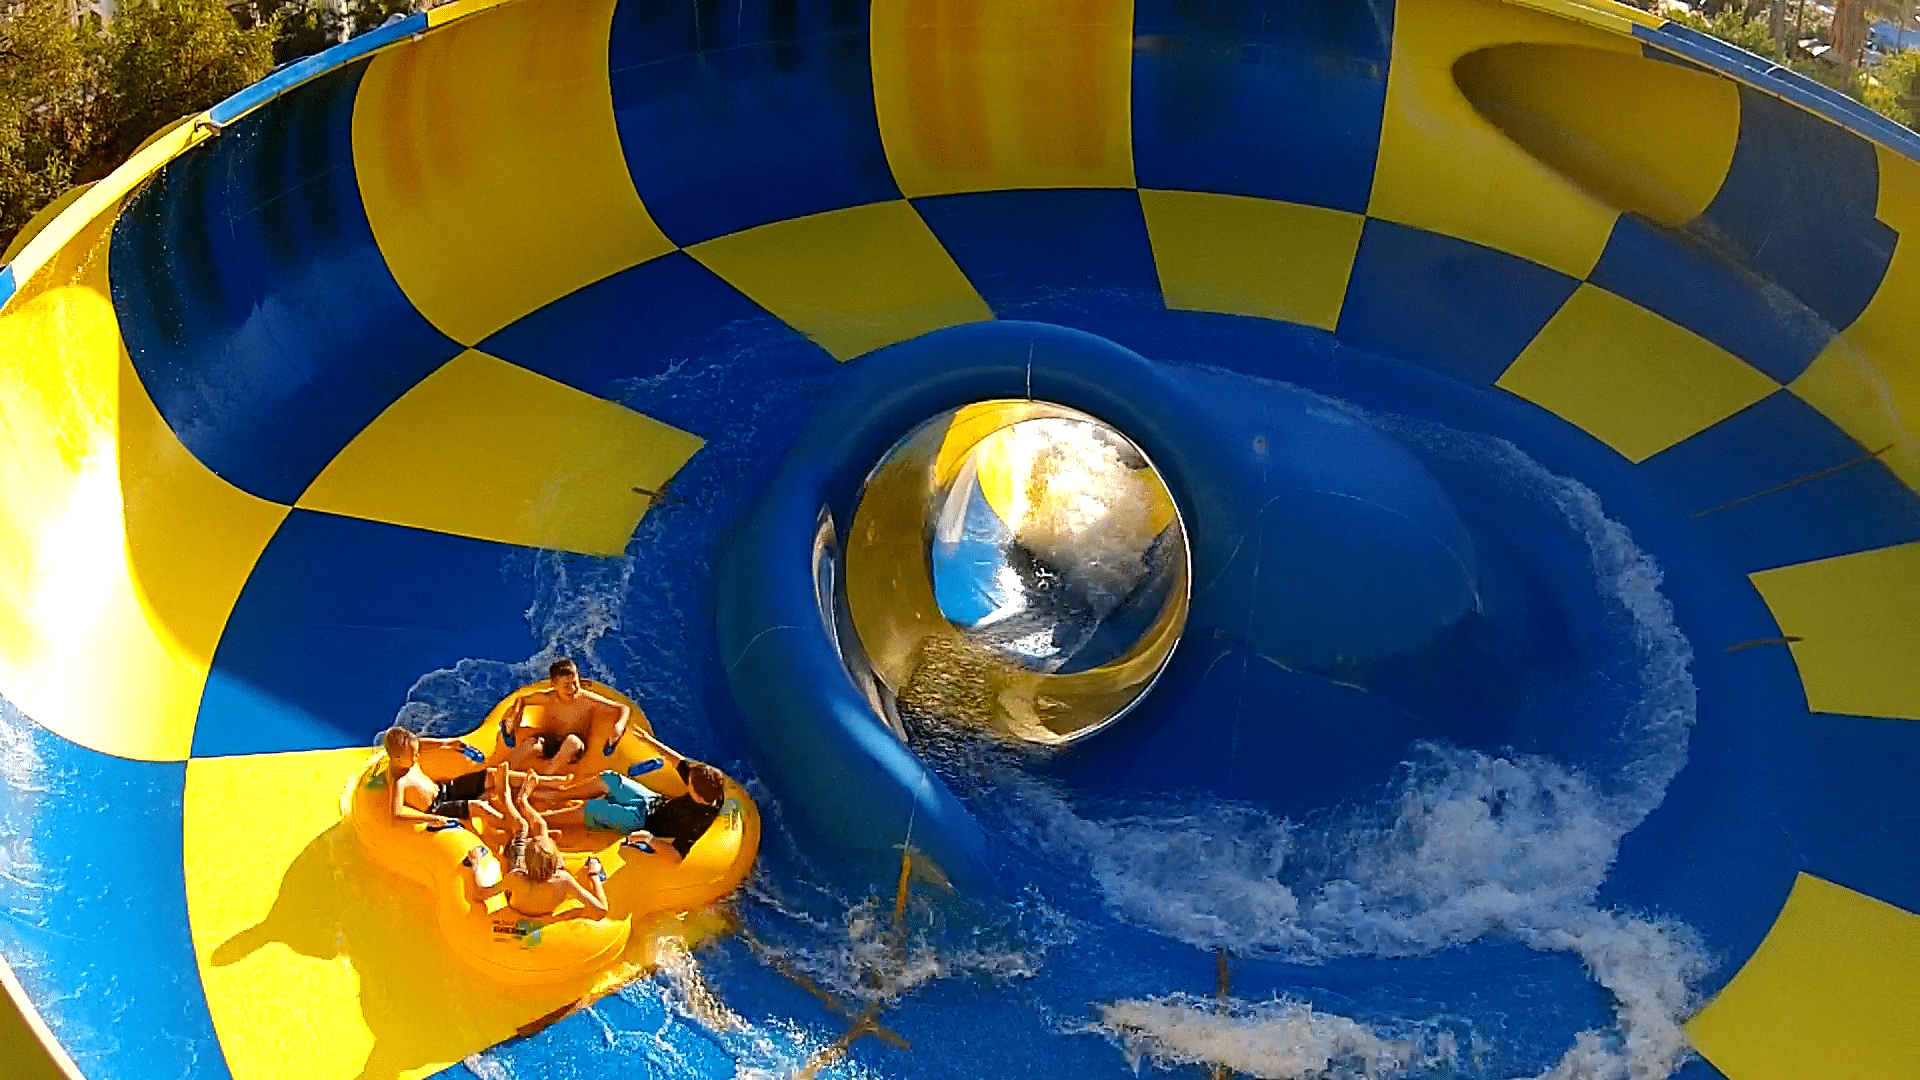 4 person bowl style water slide